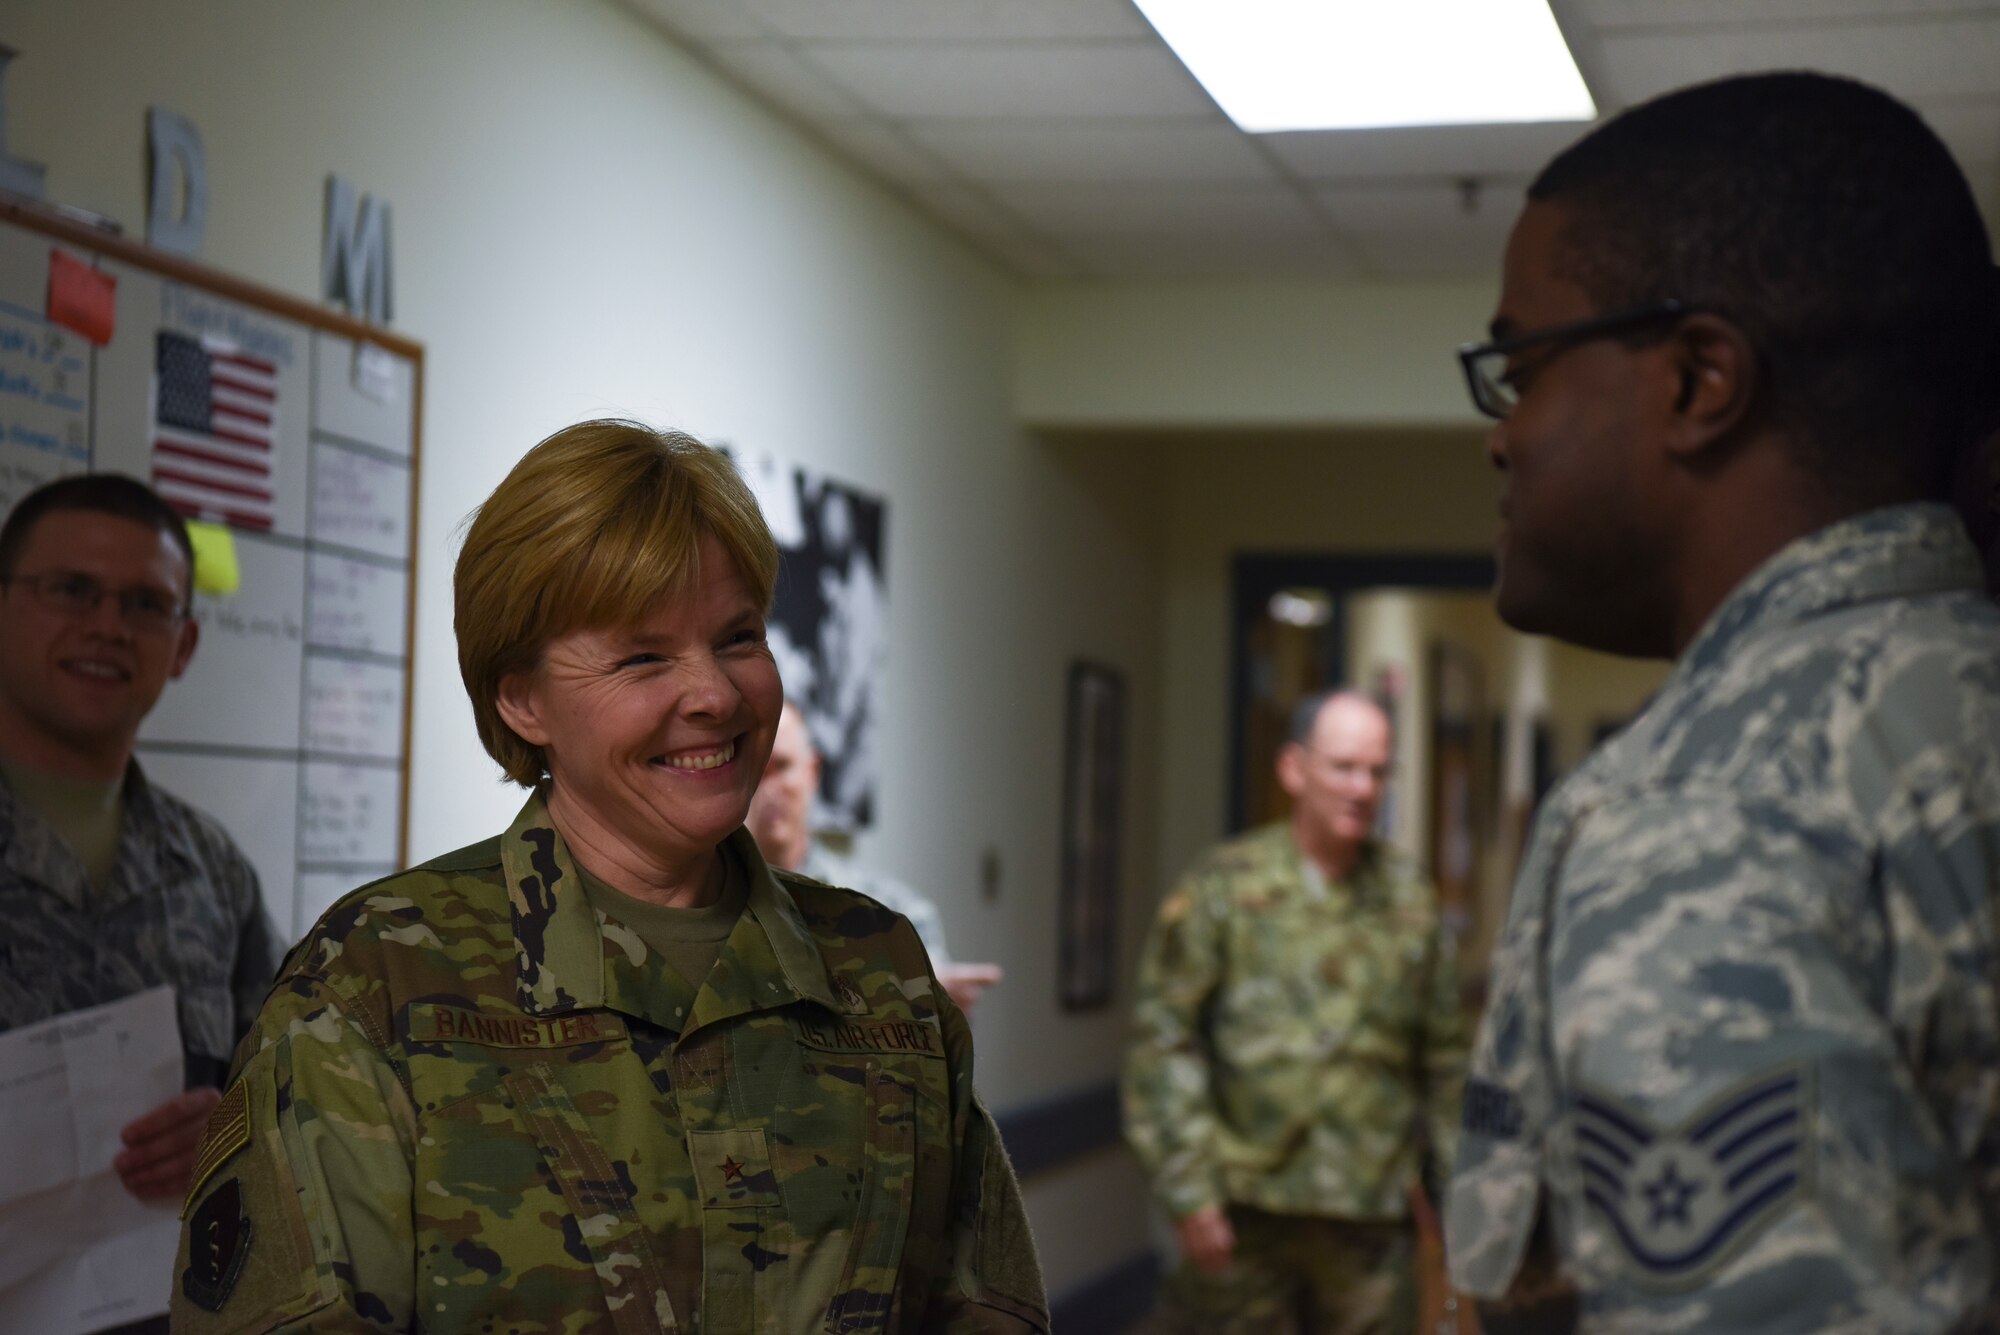 U.S. Air Force Brig. Gen. (Dr.) Sharon Bannister, Defense Health Agency education and training deputy assistant director and Assistant Surgeon General for Dental Services, speaks to Airmen from the 8th Medical Group Flight Medicine flight during her visit to Kunsan Air Base, Republic of Korea, Jan. 23, 2019. As the U.S. Air Force Dental Corps Chief, the general provides policy and operational advice to the Air Force Surgeon General on matters involving dental practices of 1,000 dentists and 2,500 technicians. (U.S. Air Force Photo by Senior Airman Savannah Waters)